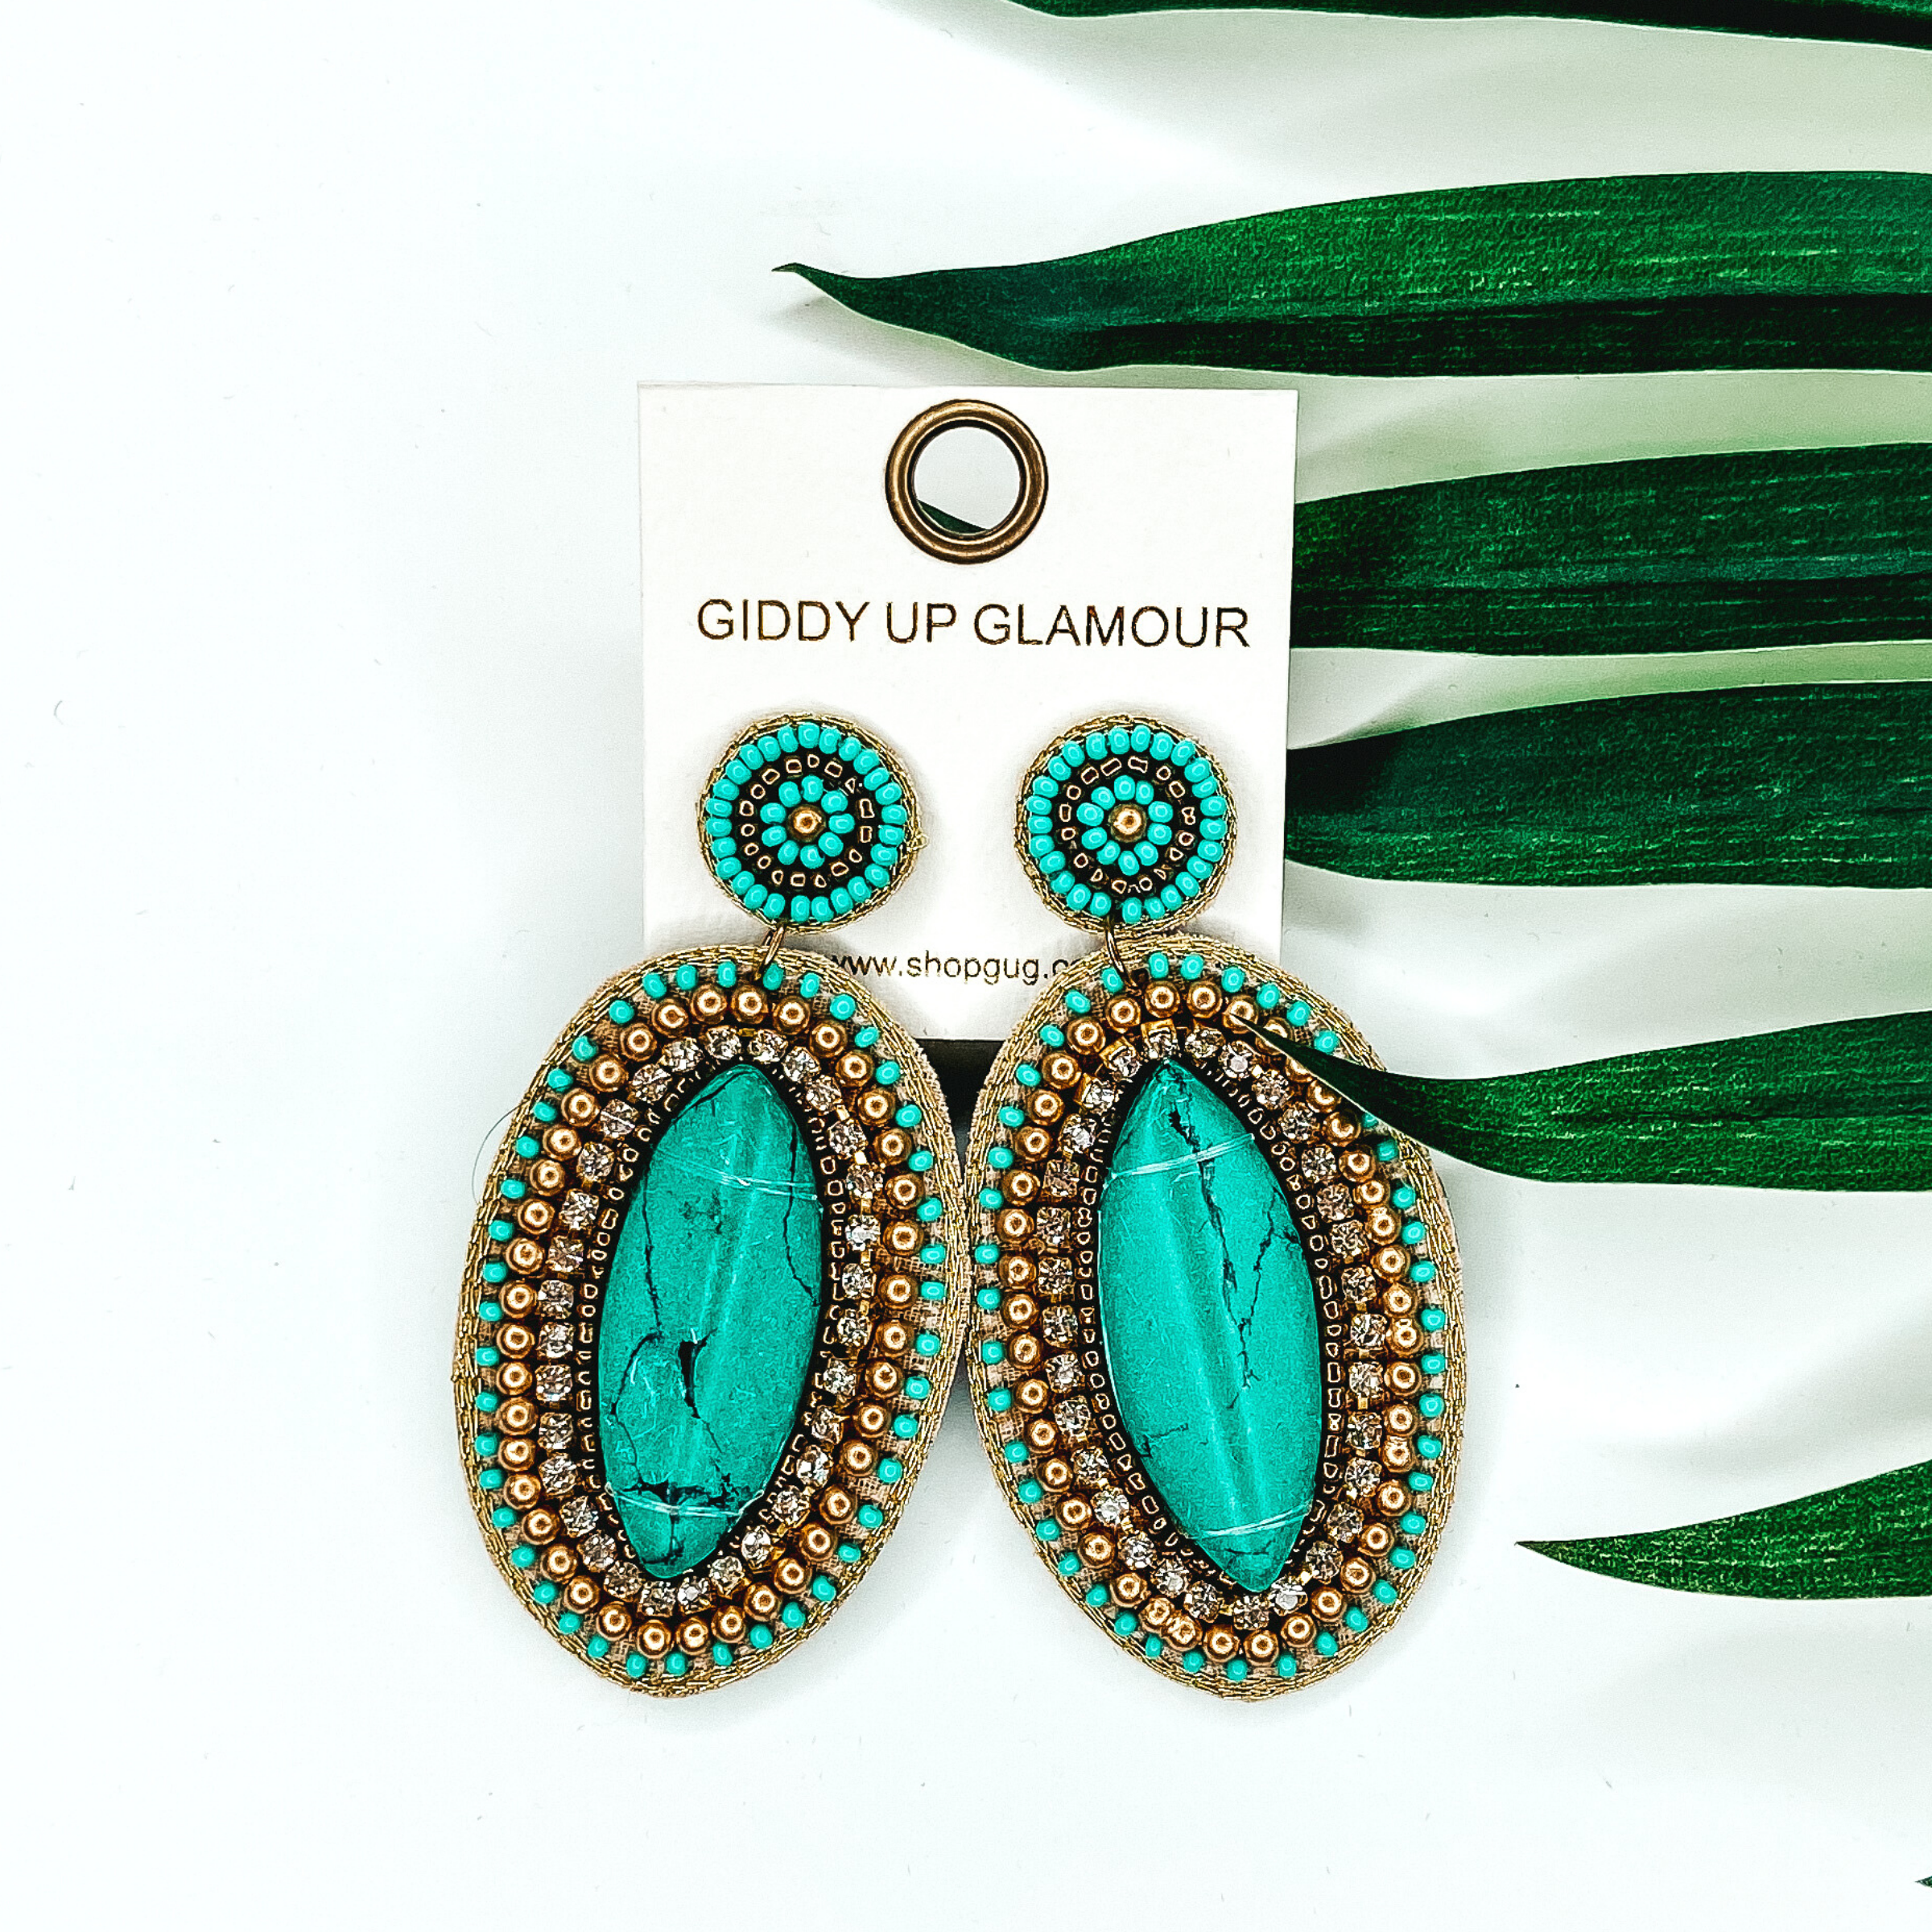 Image of Large Oval Beaded Statement Earrings with Turquoise Stone